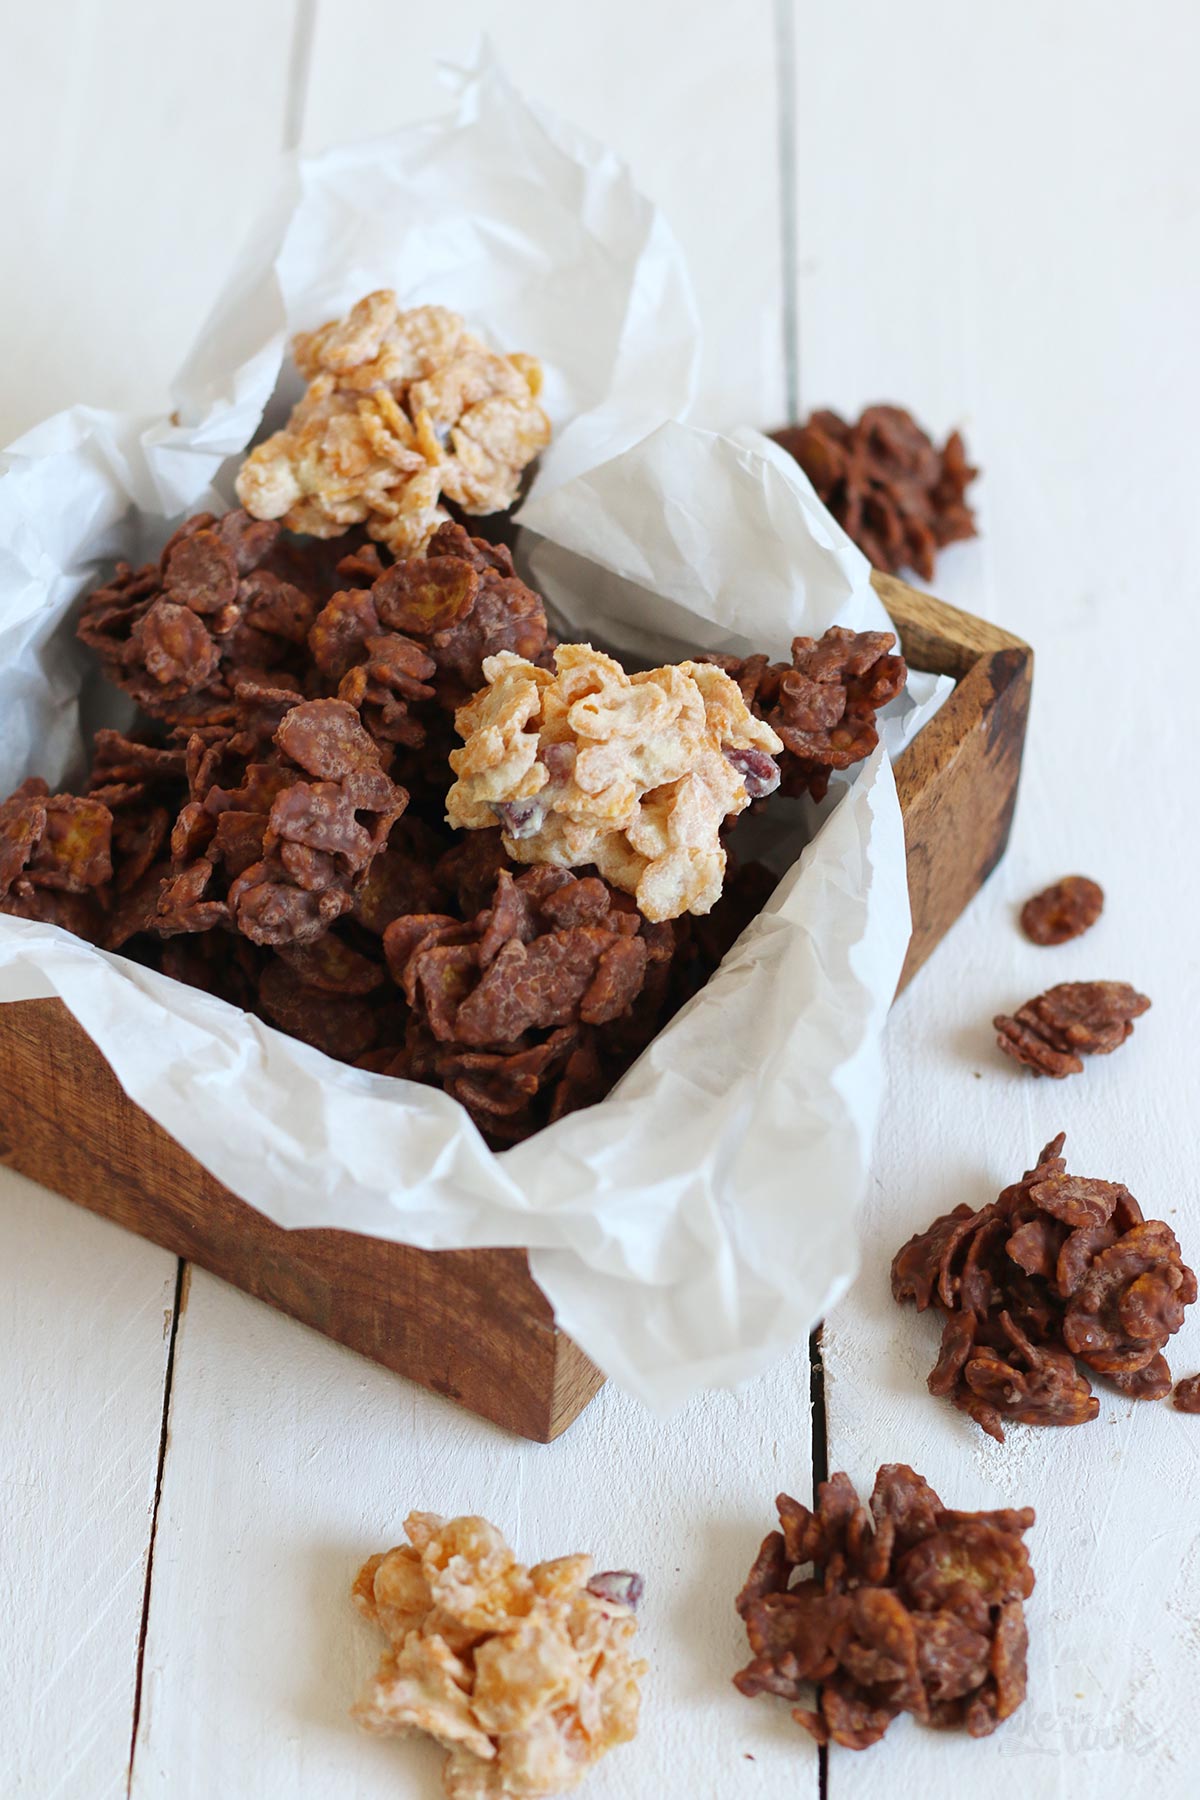 Einfache Cornflakes Cookies (No Bake) | Bake to the roots